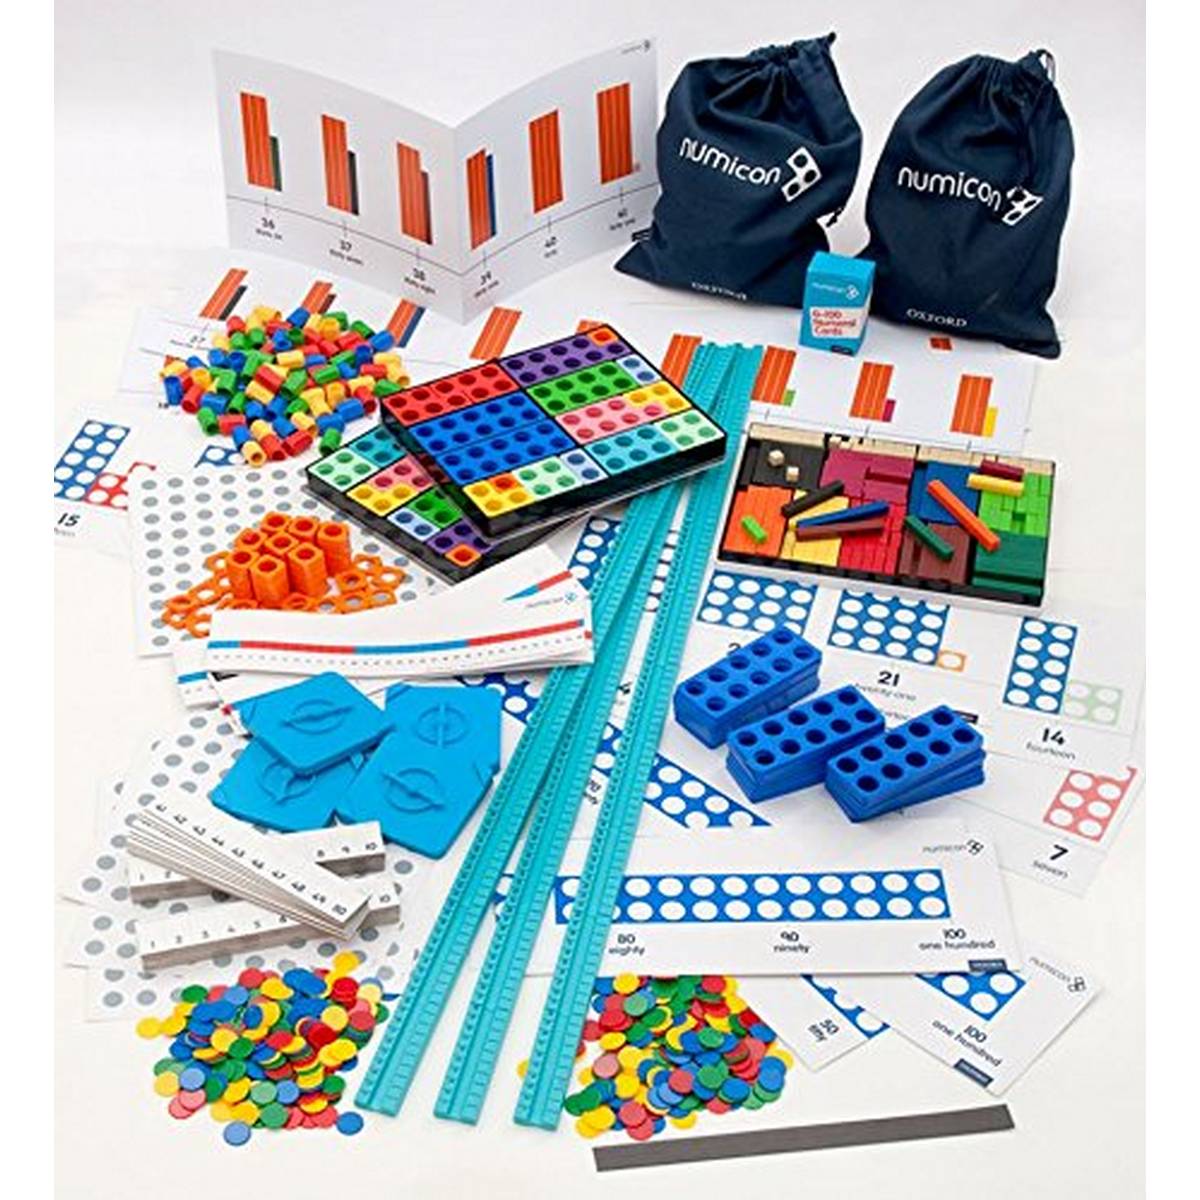 Numicon Starter Apparatus Group Kit B (3rd & 4th Class)